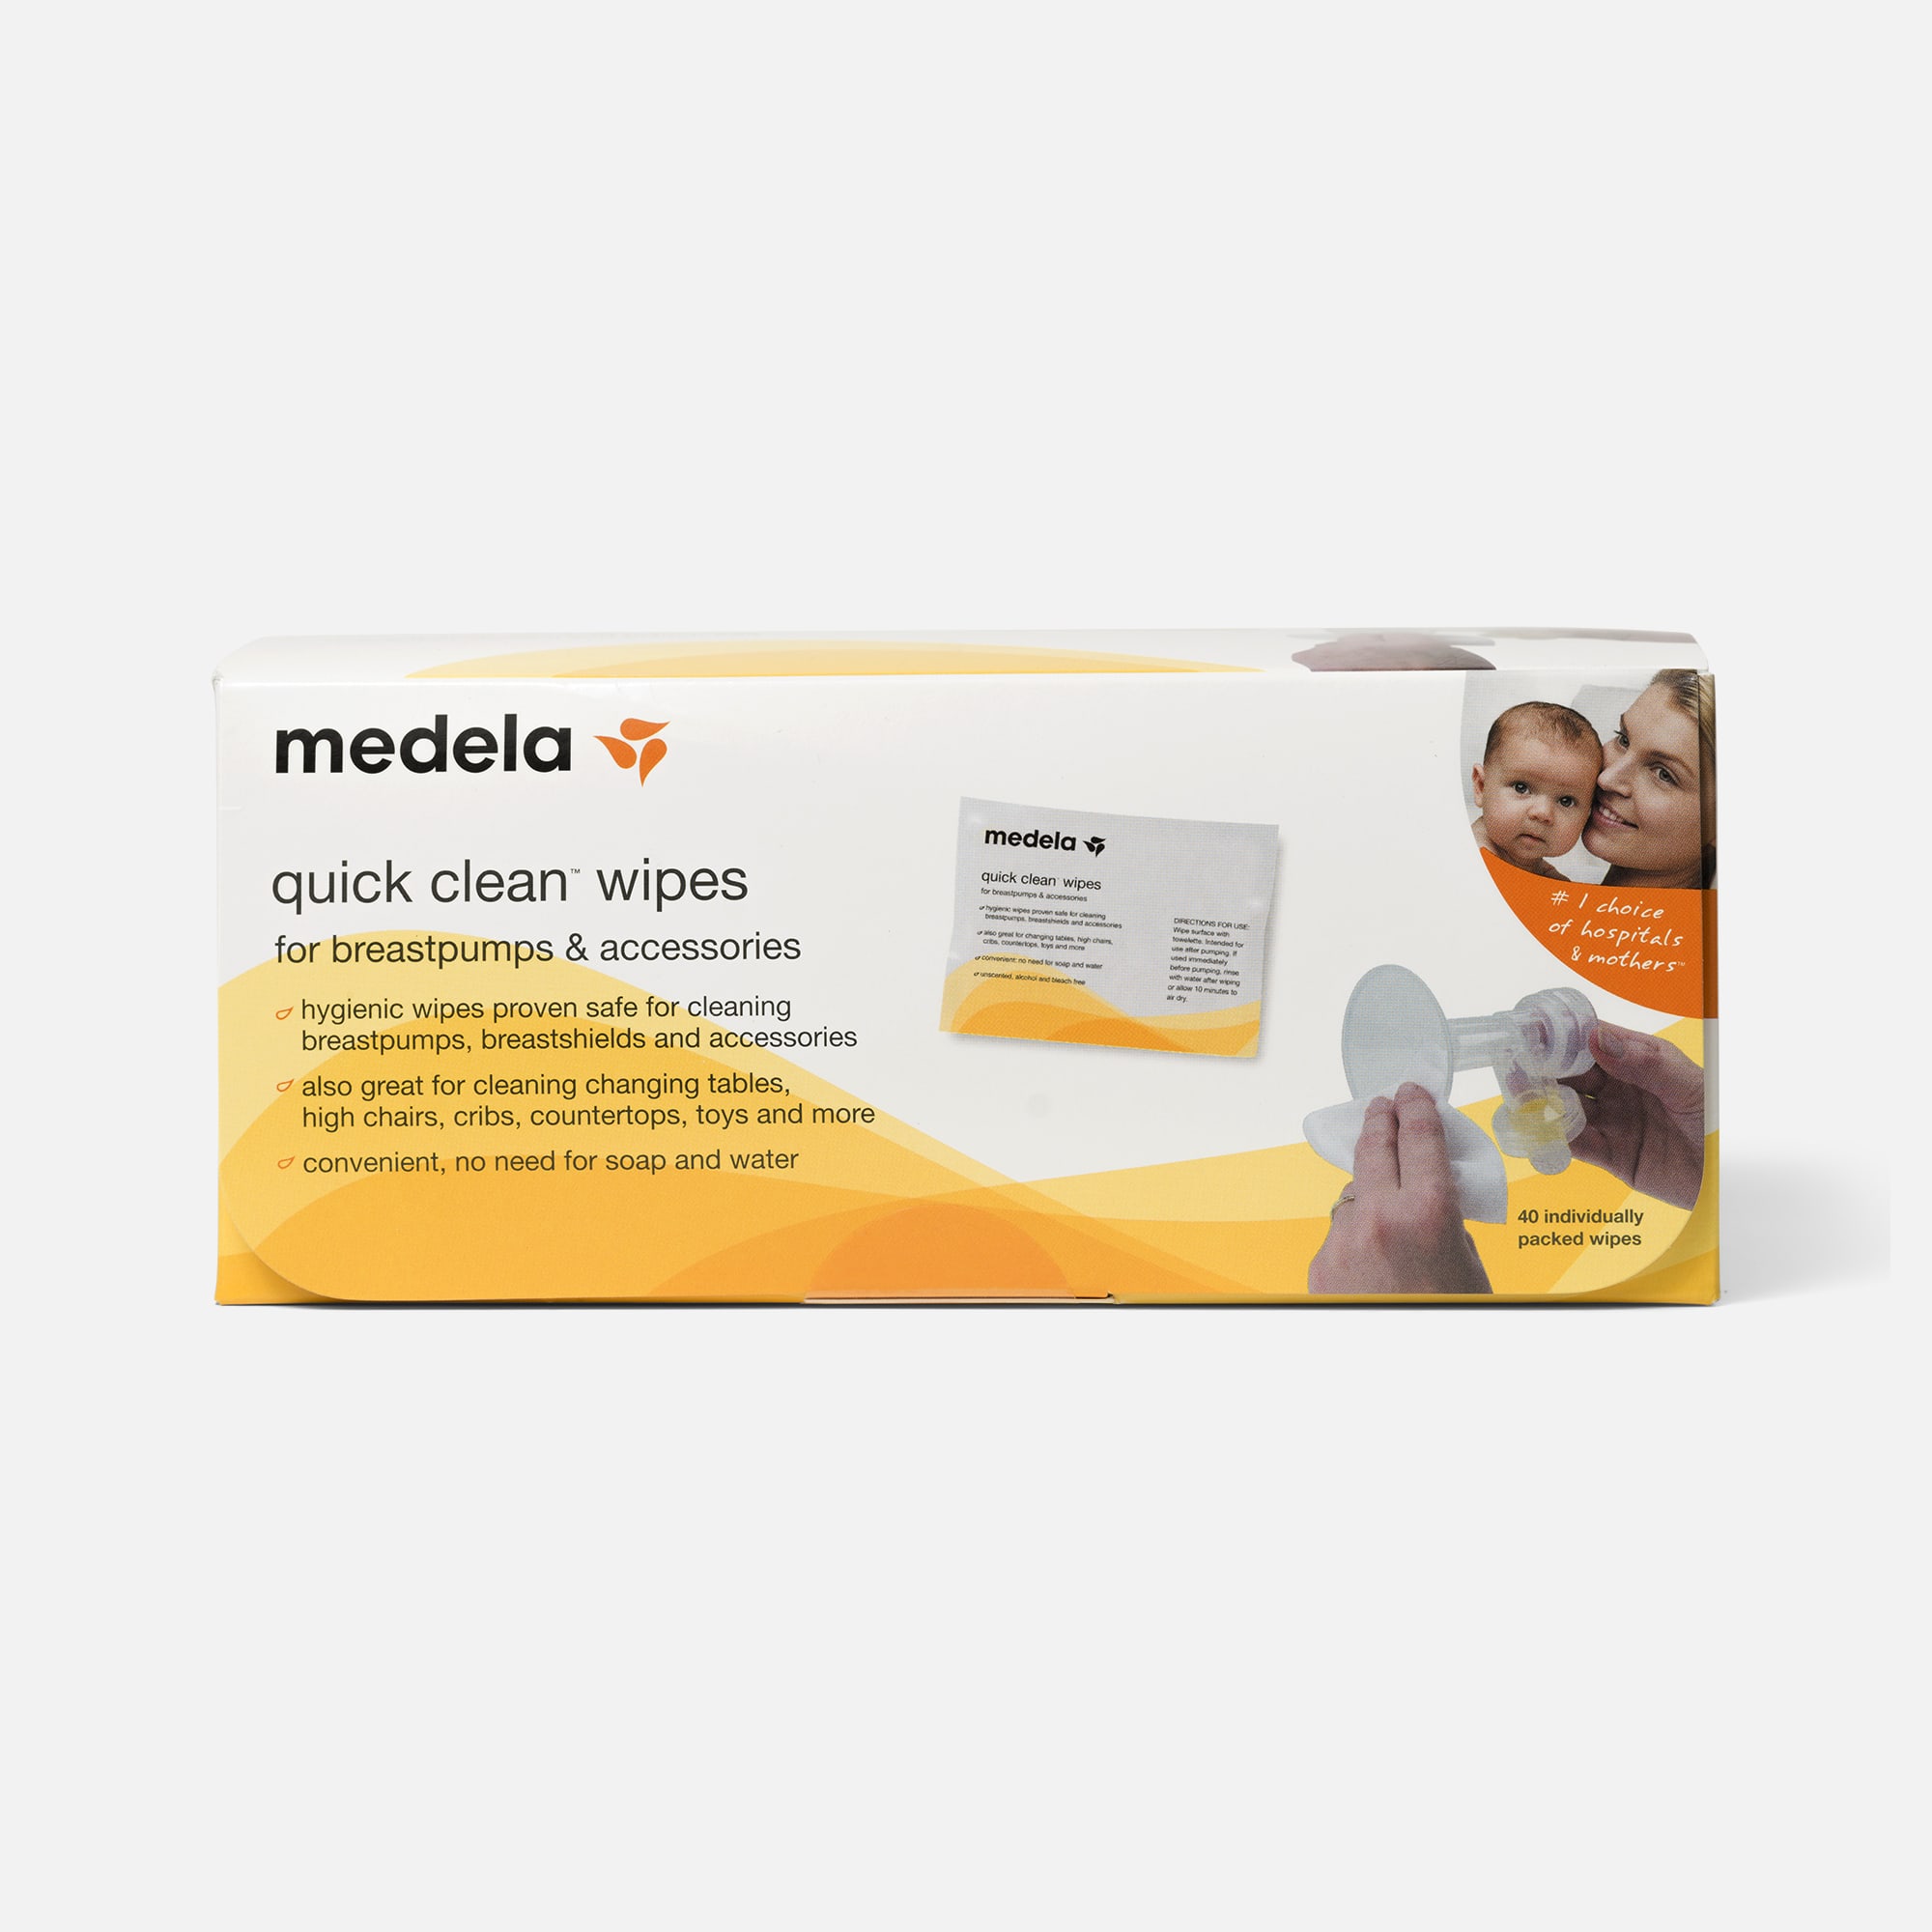 MEDELA QUICK CLEAN WIPE BREAST PUMP KIT ACCESSORY CLEANING WIPES 40 PK #87059 